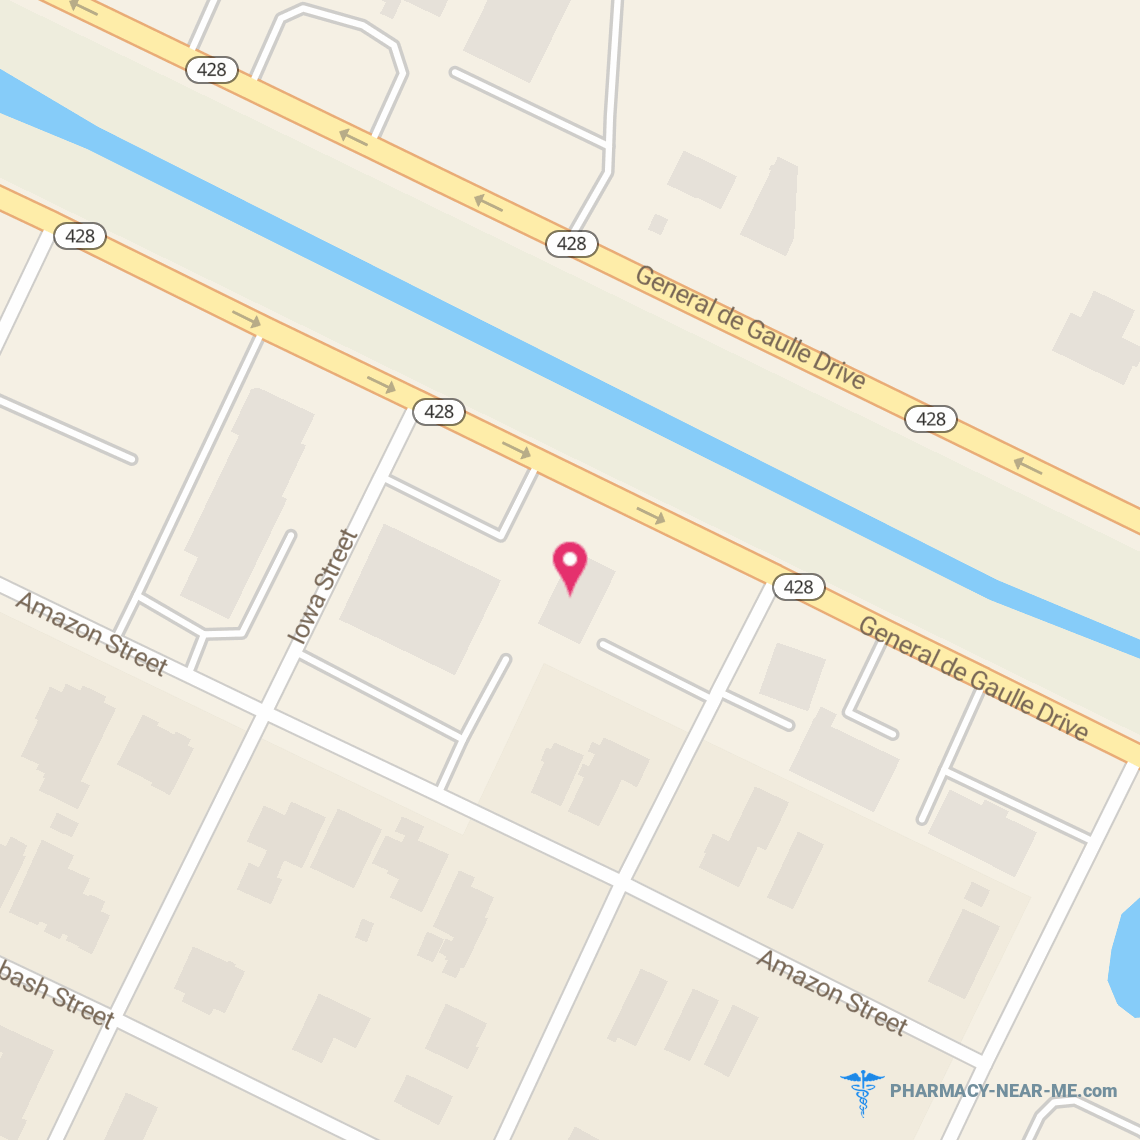 ST. THOMAS COMMUNITY HEALTH CENTER, INC - Pharmacy Hours, Phone, Reviews & Information: 3221 General De Gaulle Drive, New Orleans, Louisiana 70114, United States